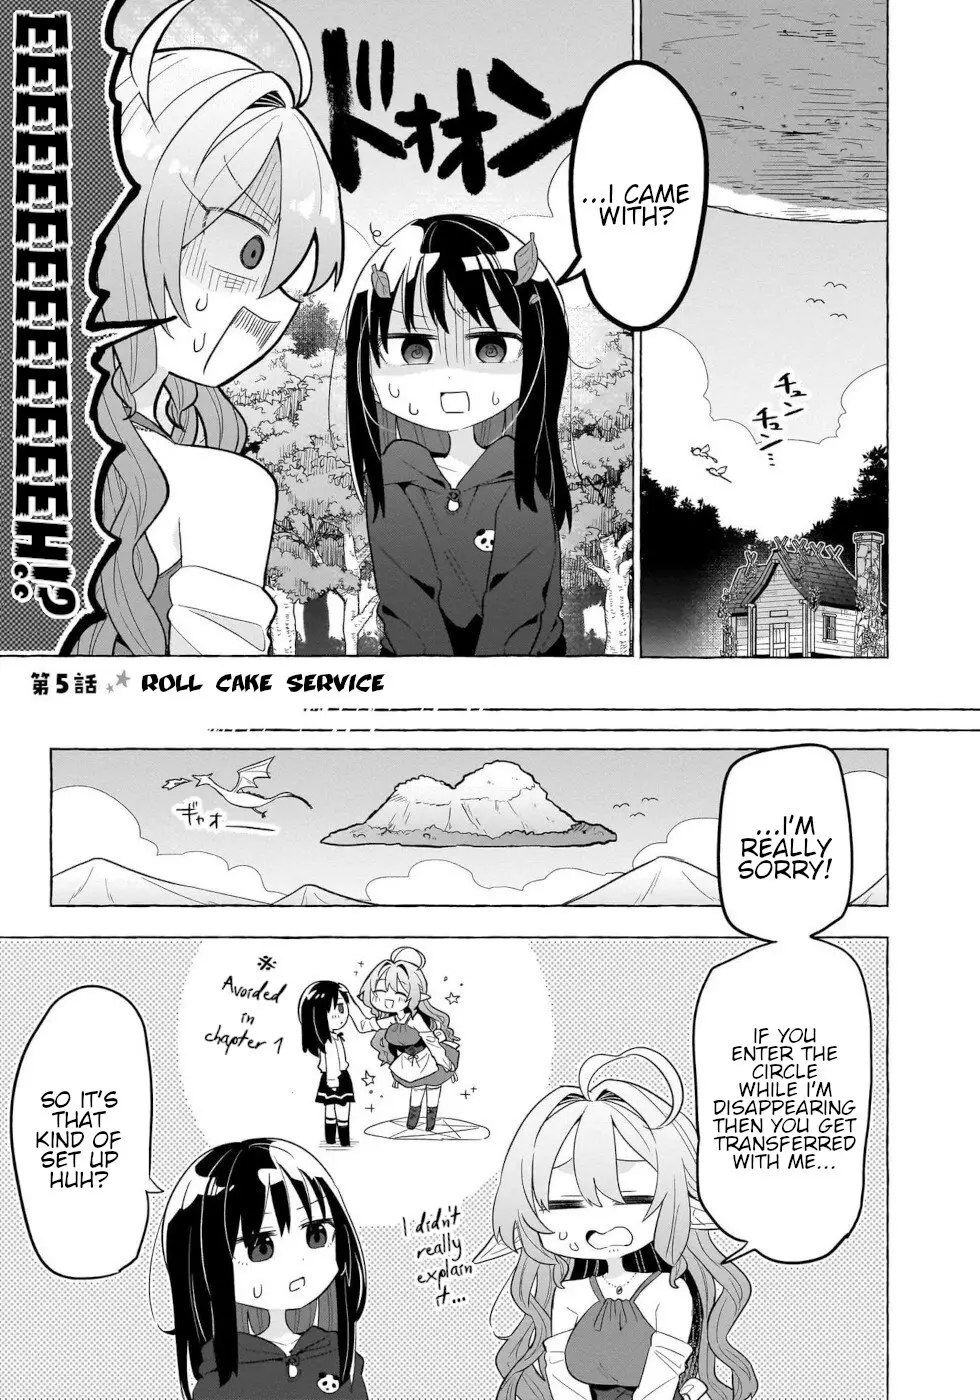 Sweets, Elf, And A High School Girl - 5 page 1-c6de350b